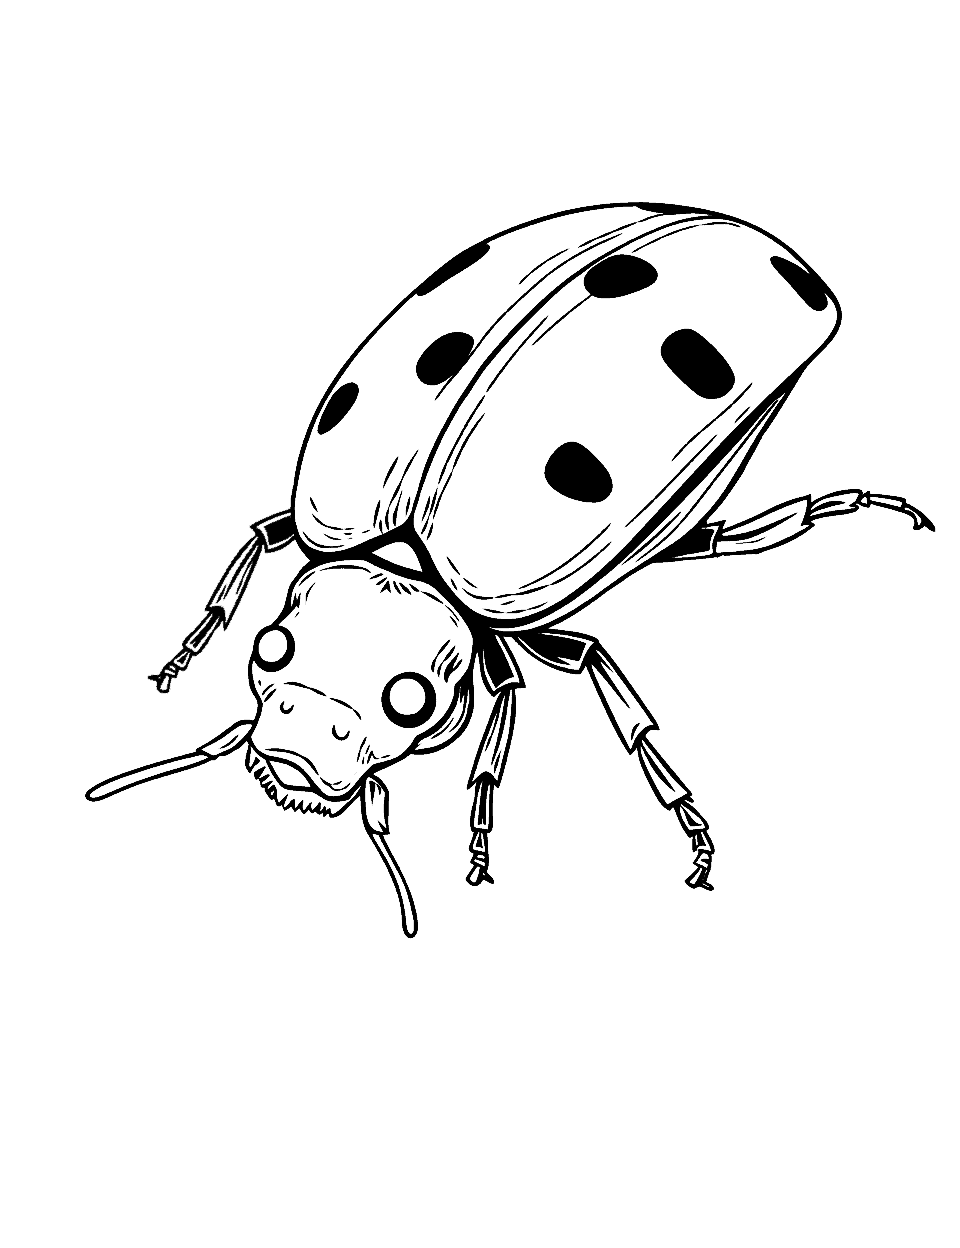 Realistic Ladybug Close-Up Coloring Page - A detailed close-up of a ladybug, showcasing its spots.